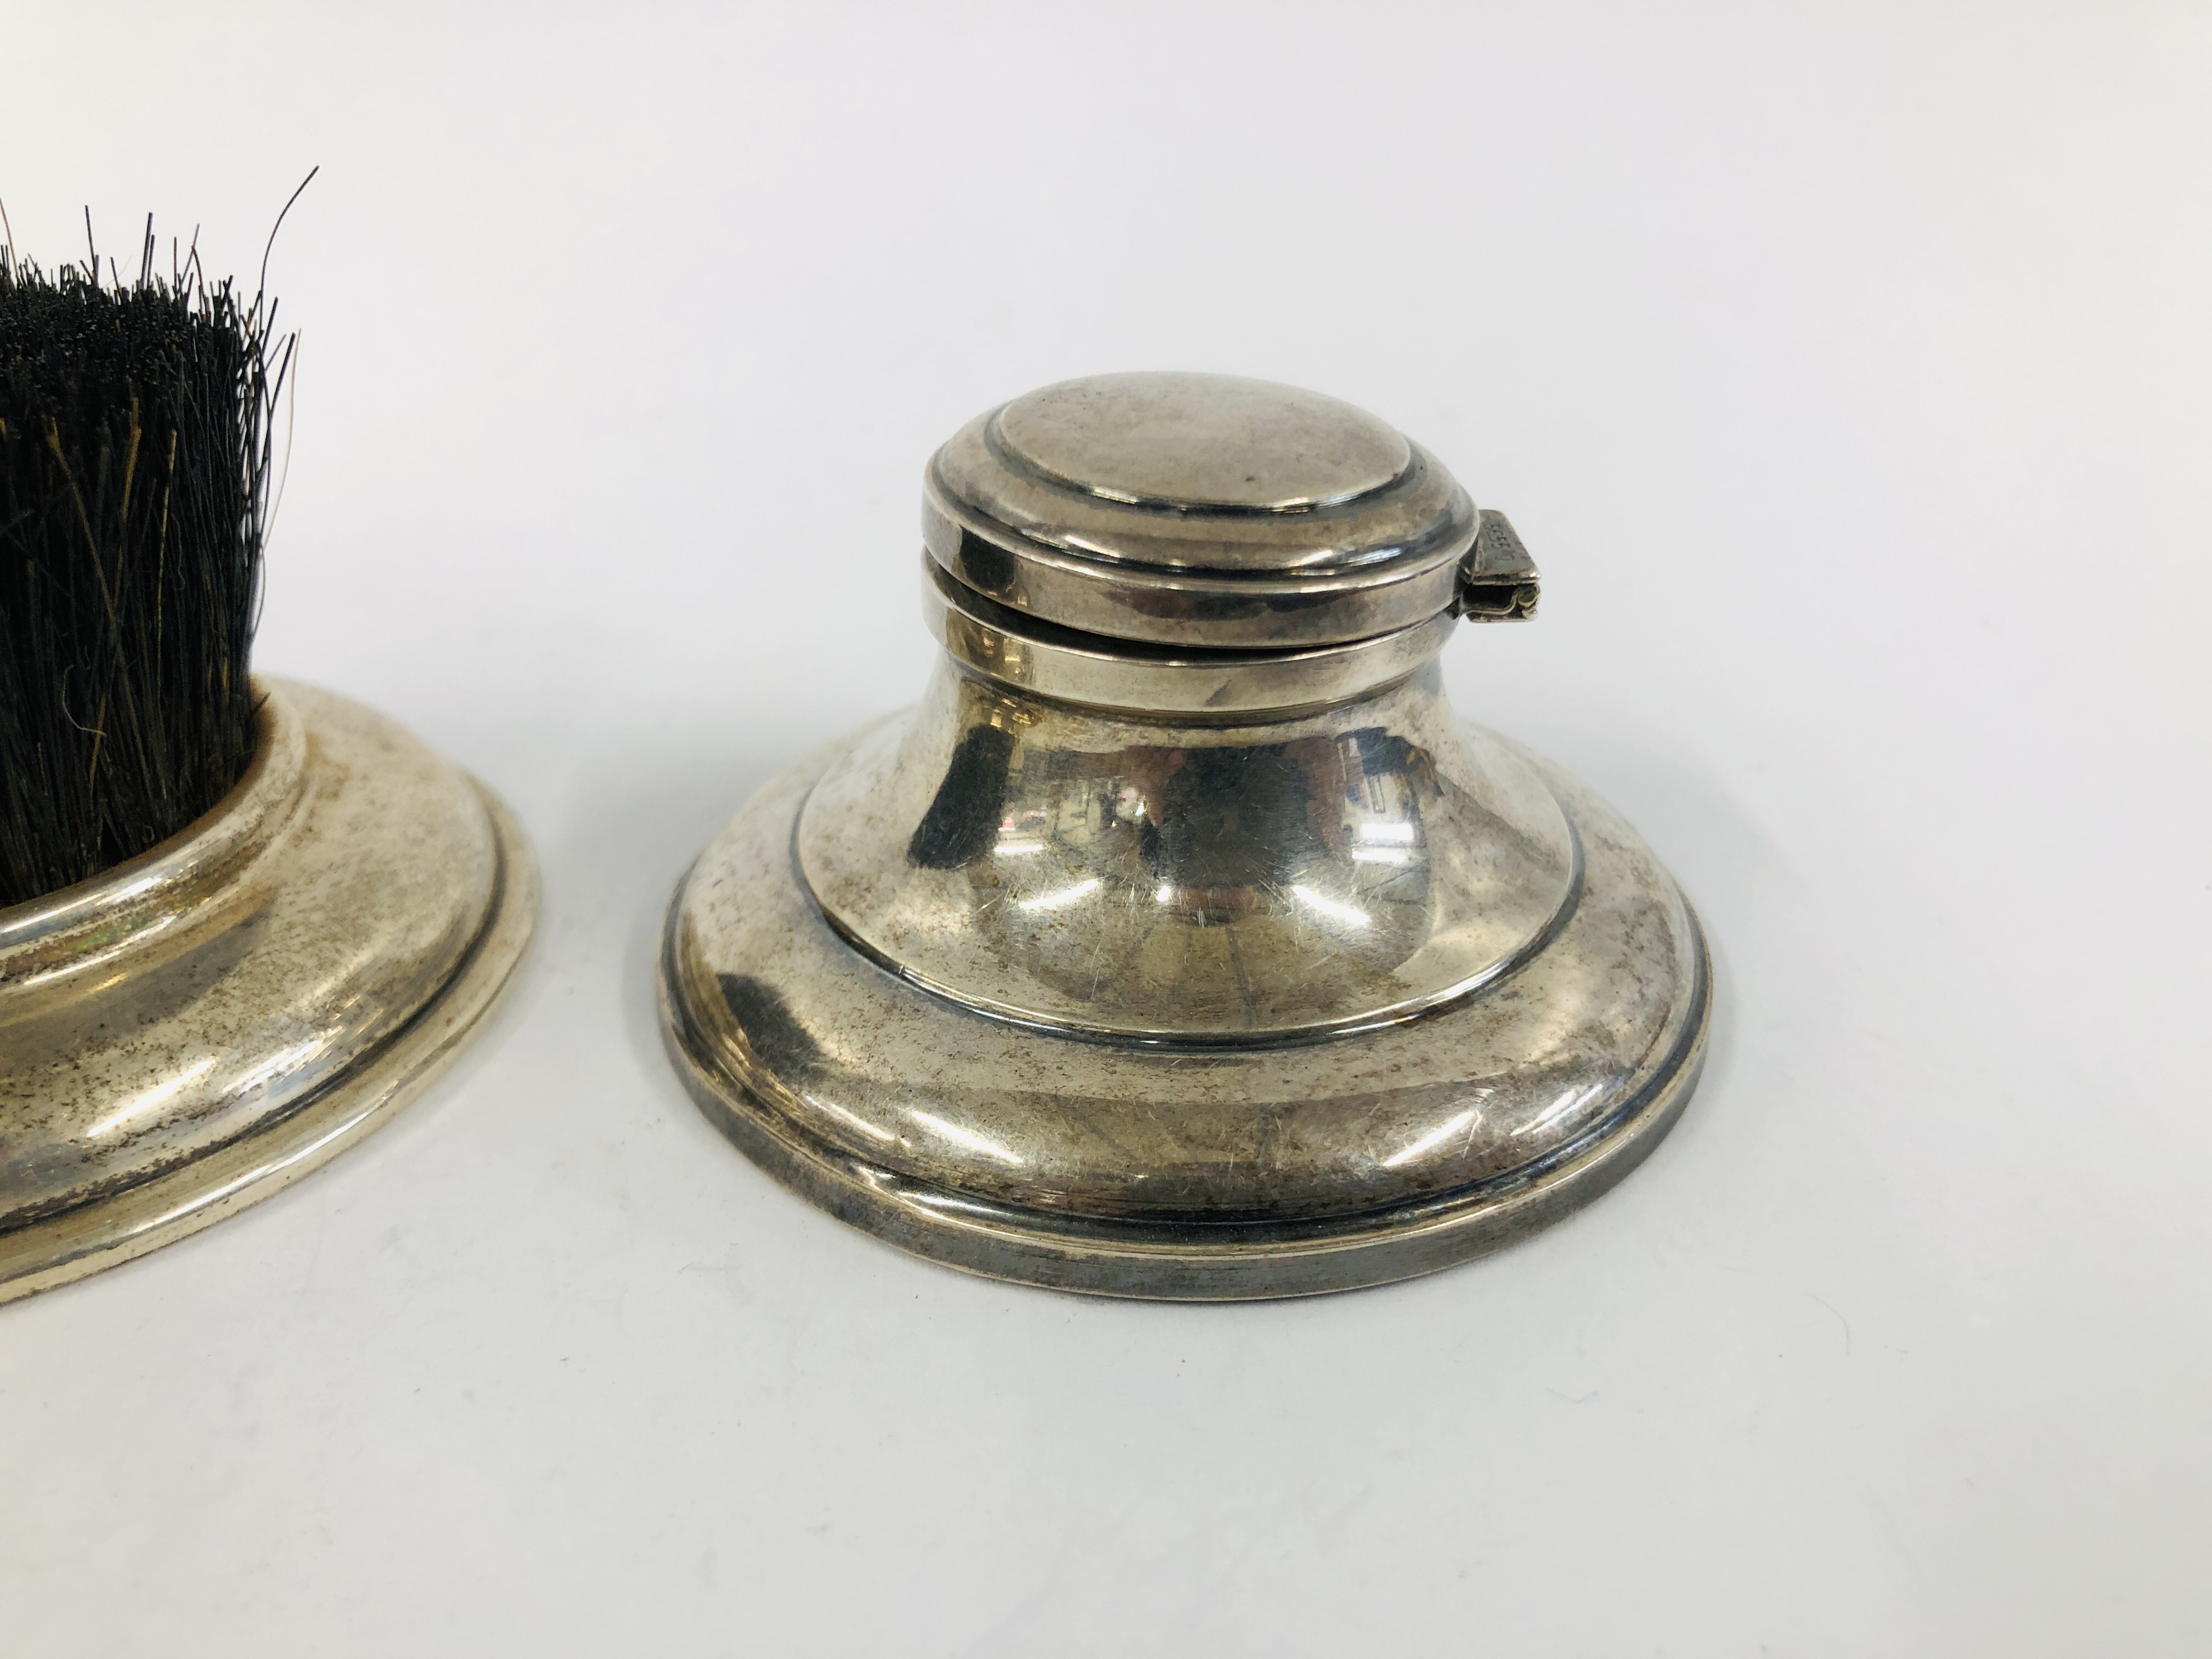 SILVER MOUNTED CIRCULAR BRUSH, BIRMINGHAM 1902 ALONG WITH A SILVER INKWELL AND SILVER SHELL SALT, - Image 5 of 8